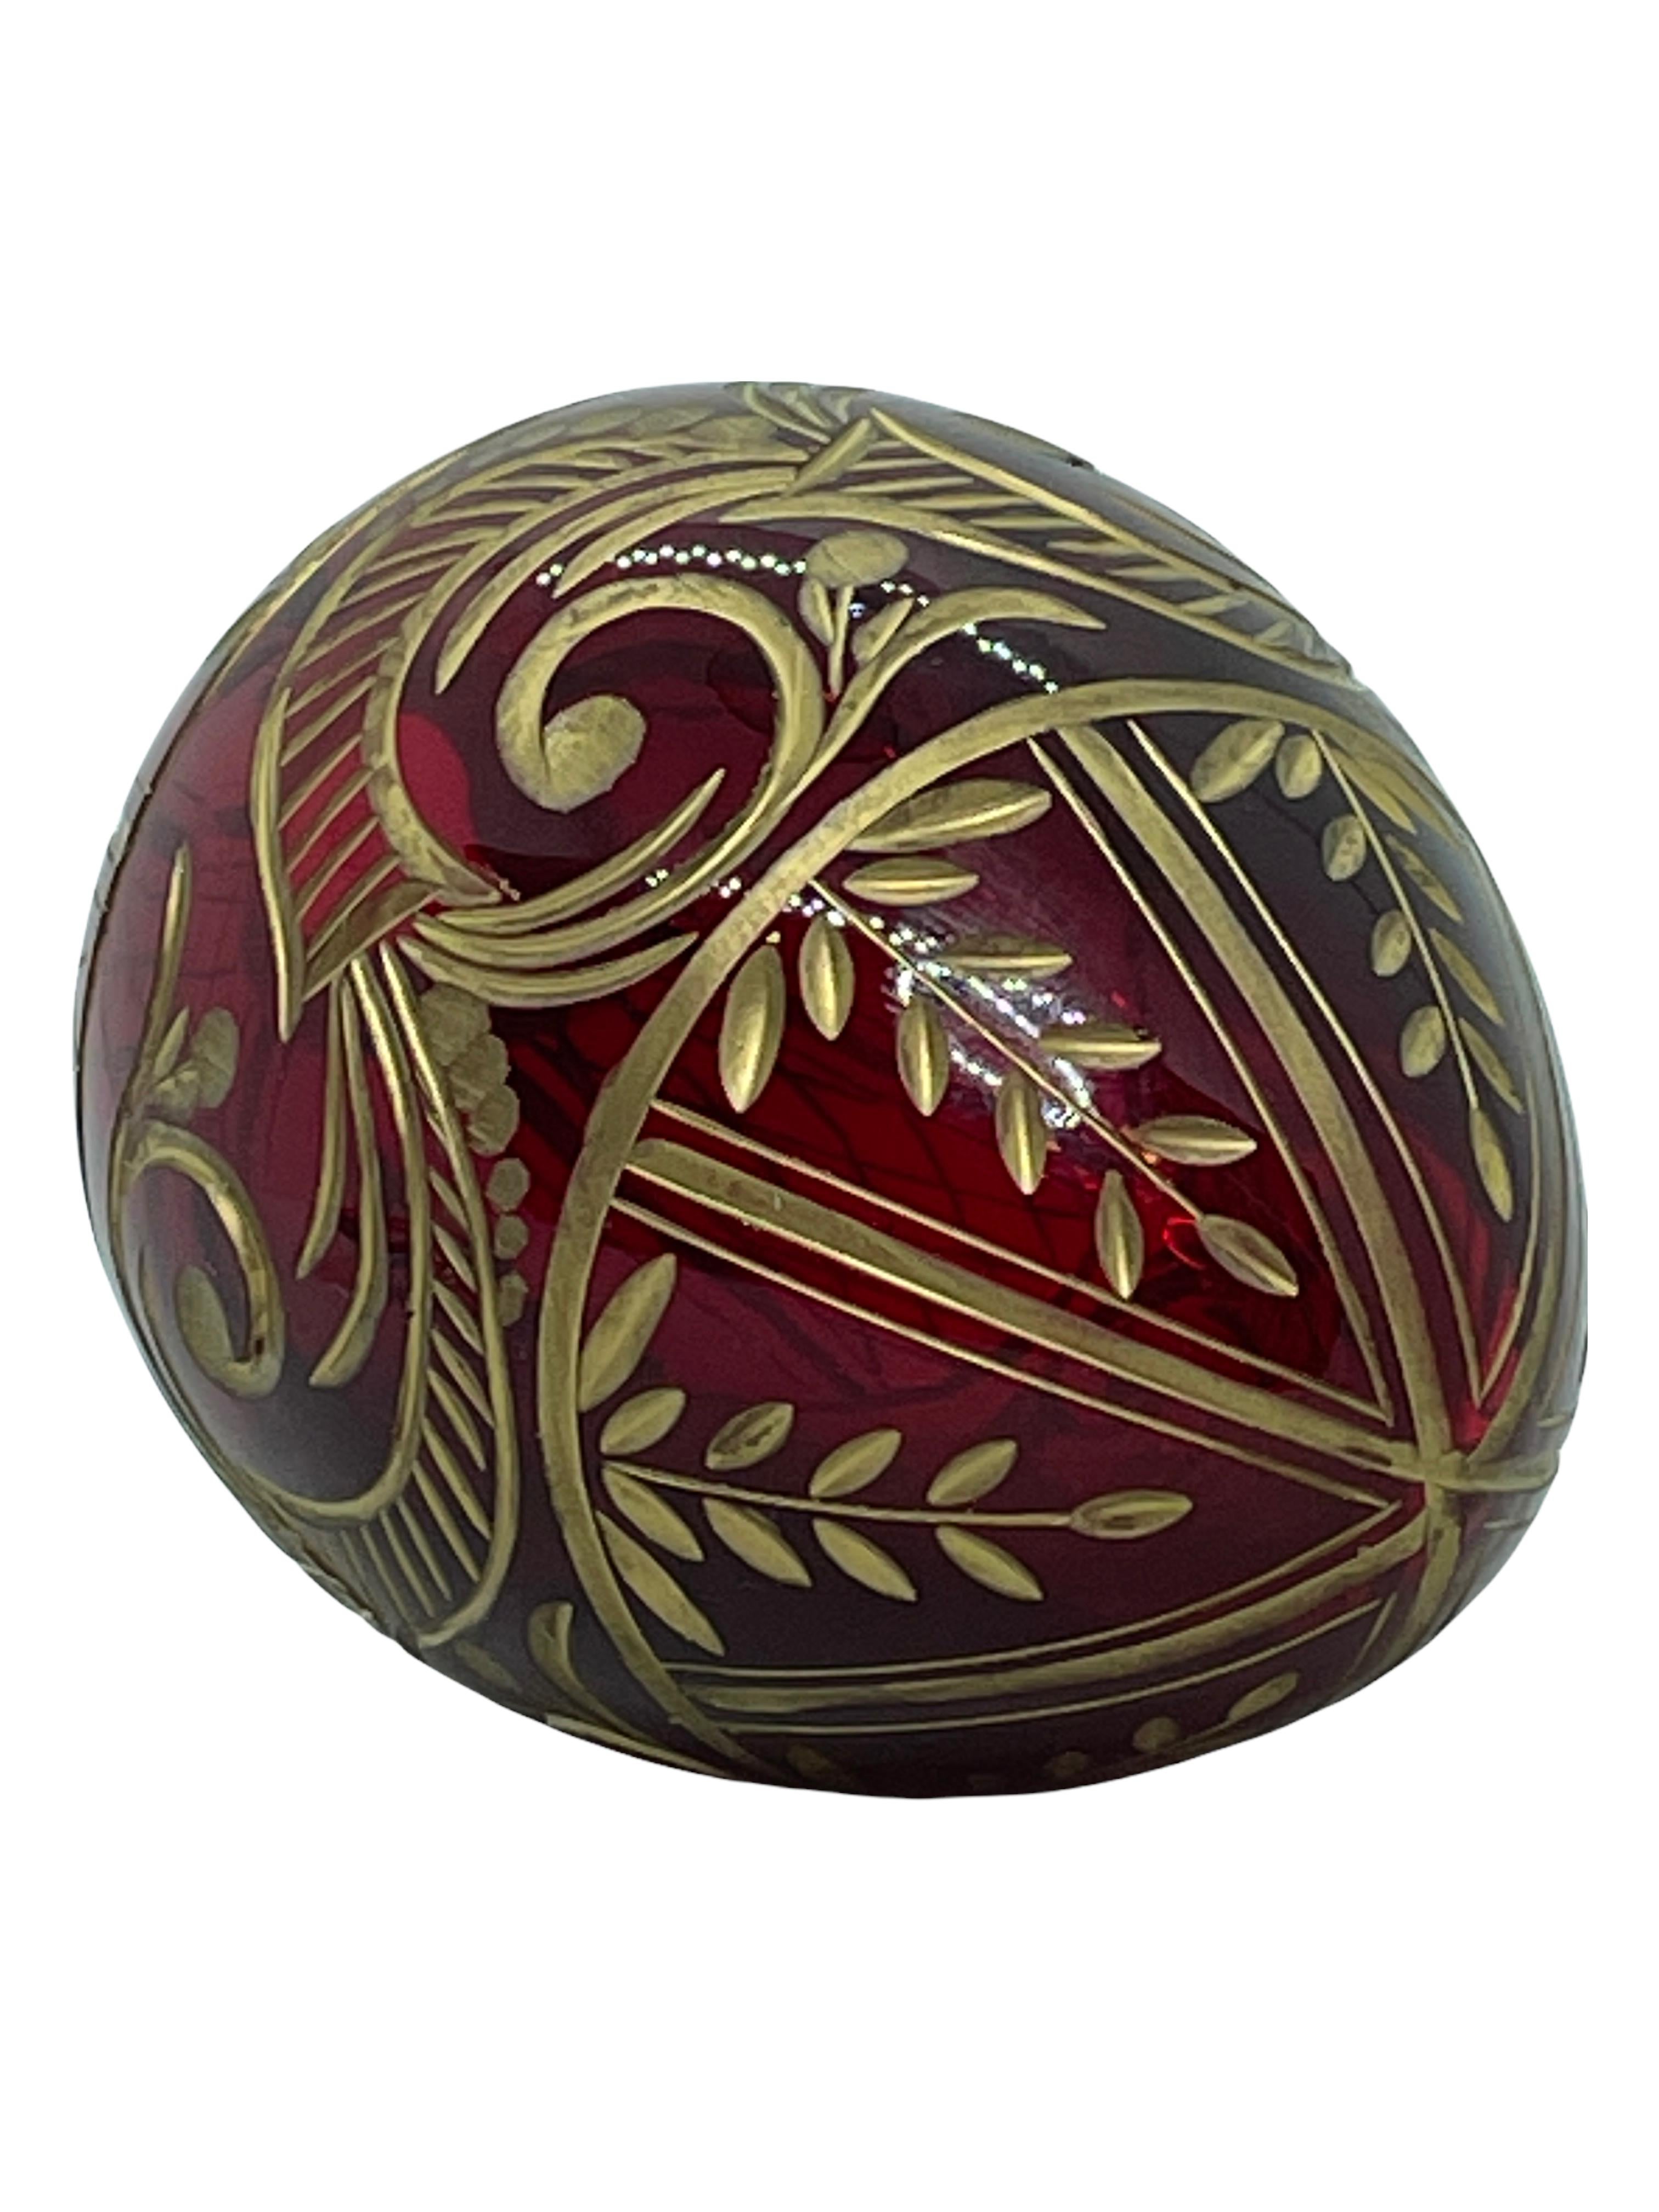 Hand-Crafted Vintage Faberge Russia Style Ruby Red Glass Egg with Etched Decorations